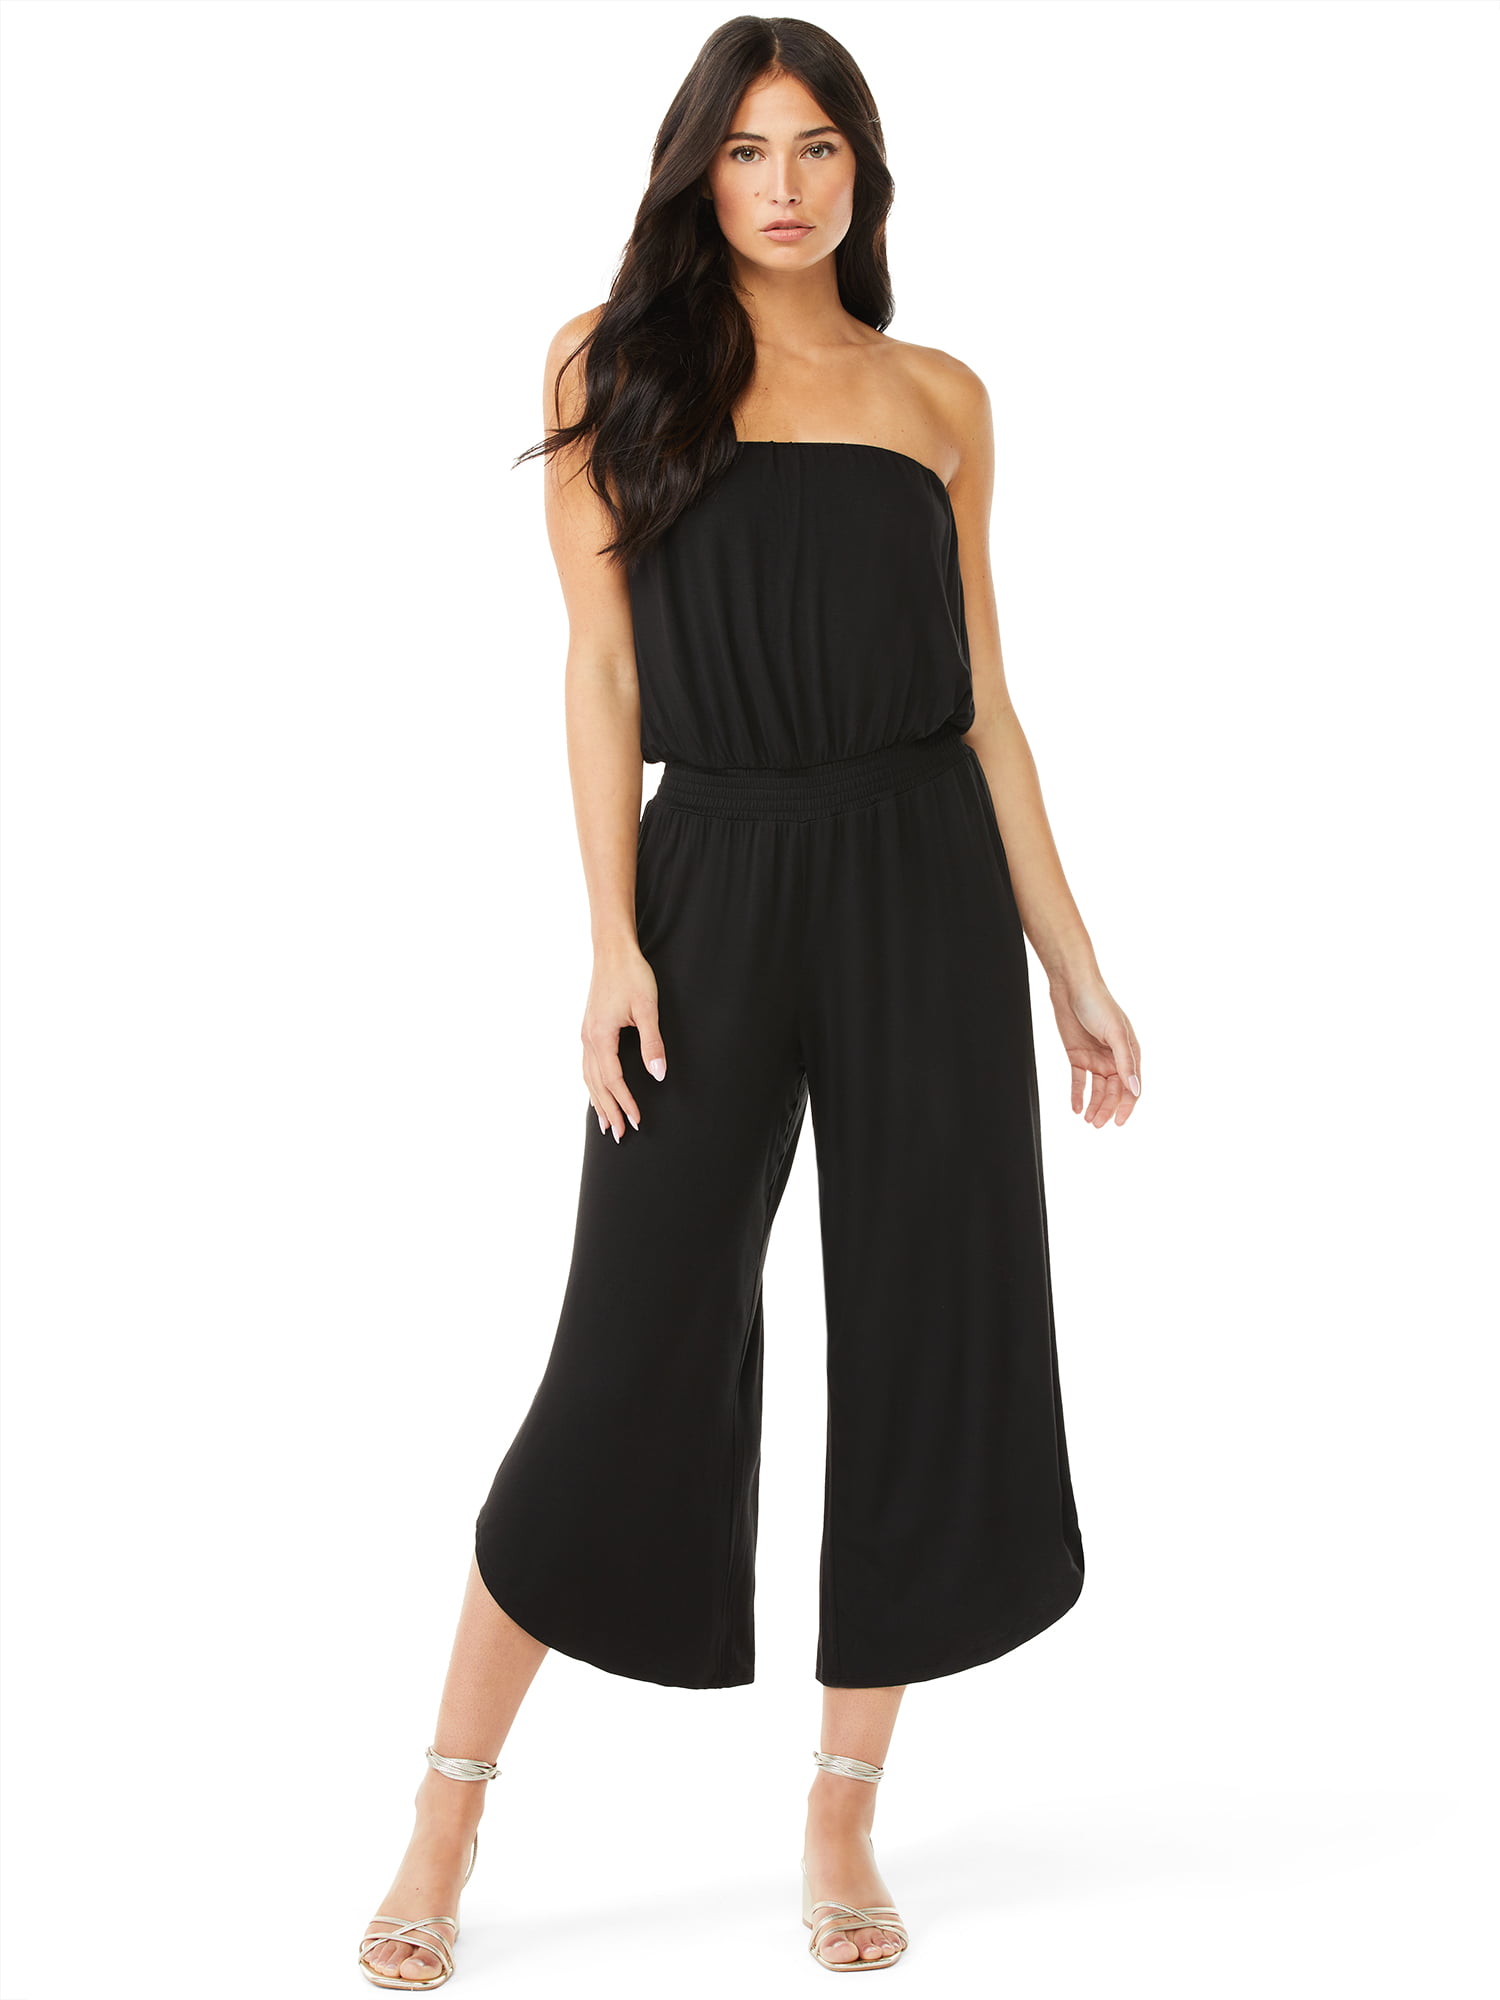 Sofia Jeans by Sofia Vergara Women's Strapless Jumpsuit with ...